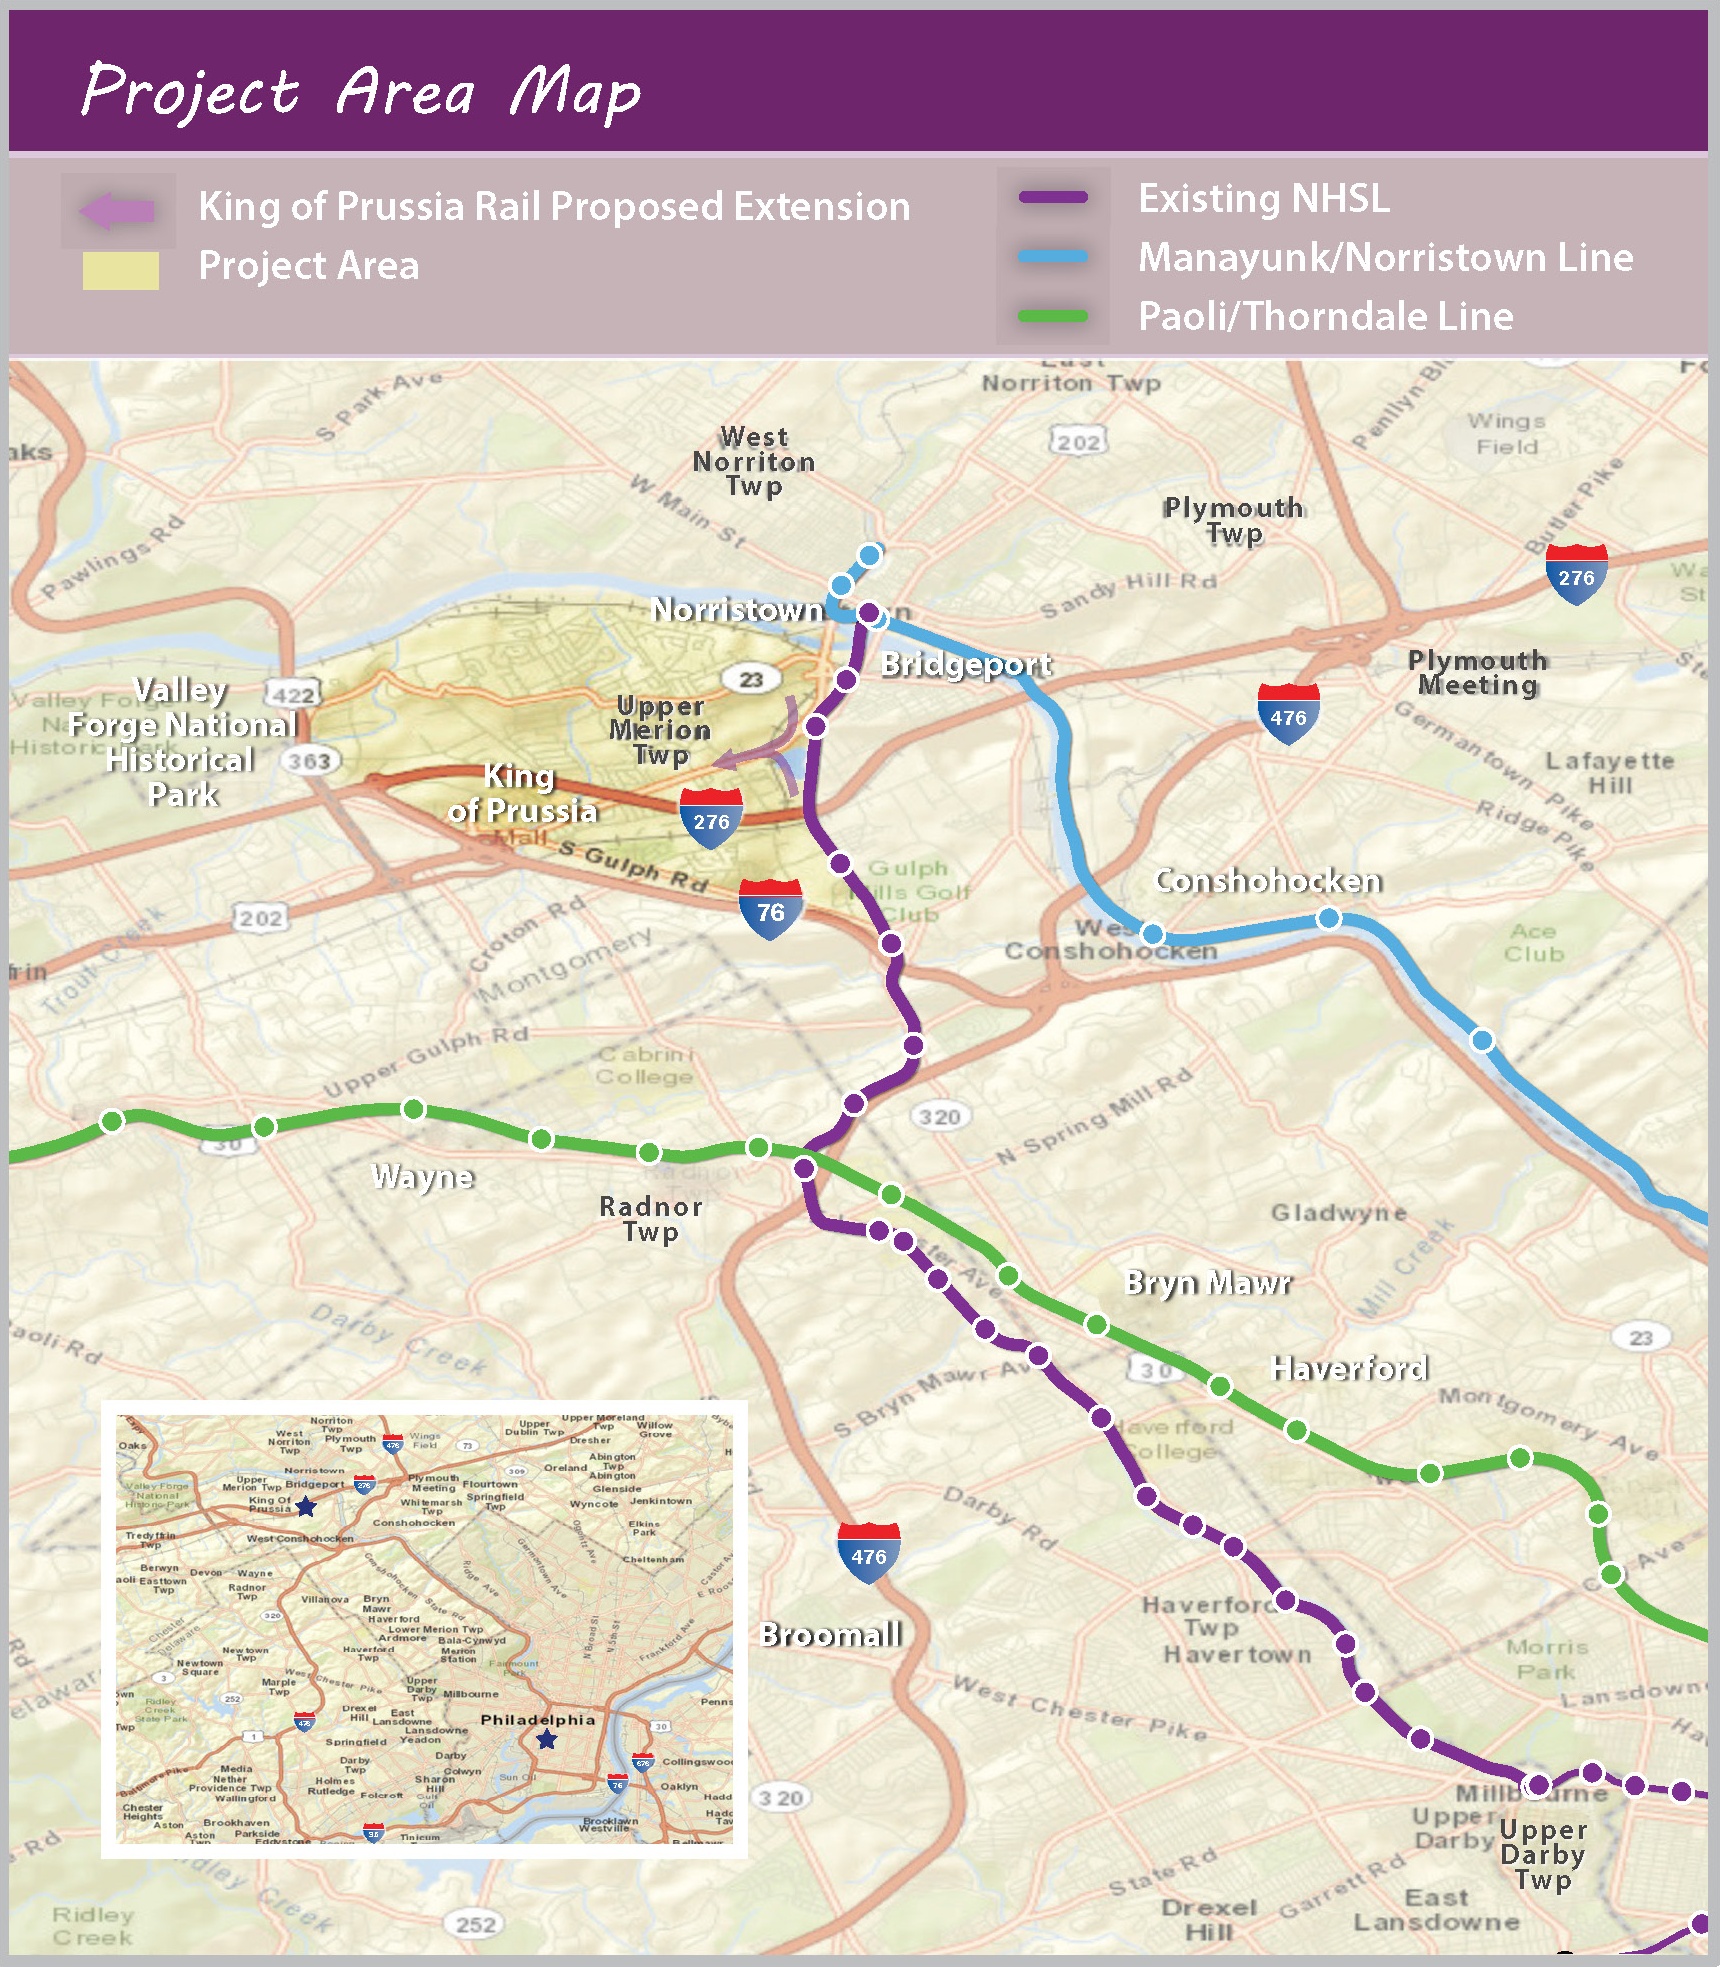 Proposed King of Prussia rail extension